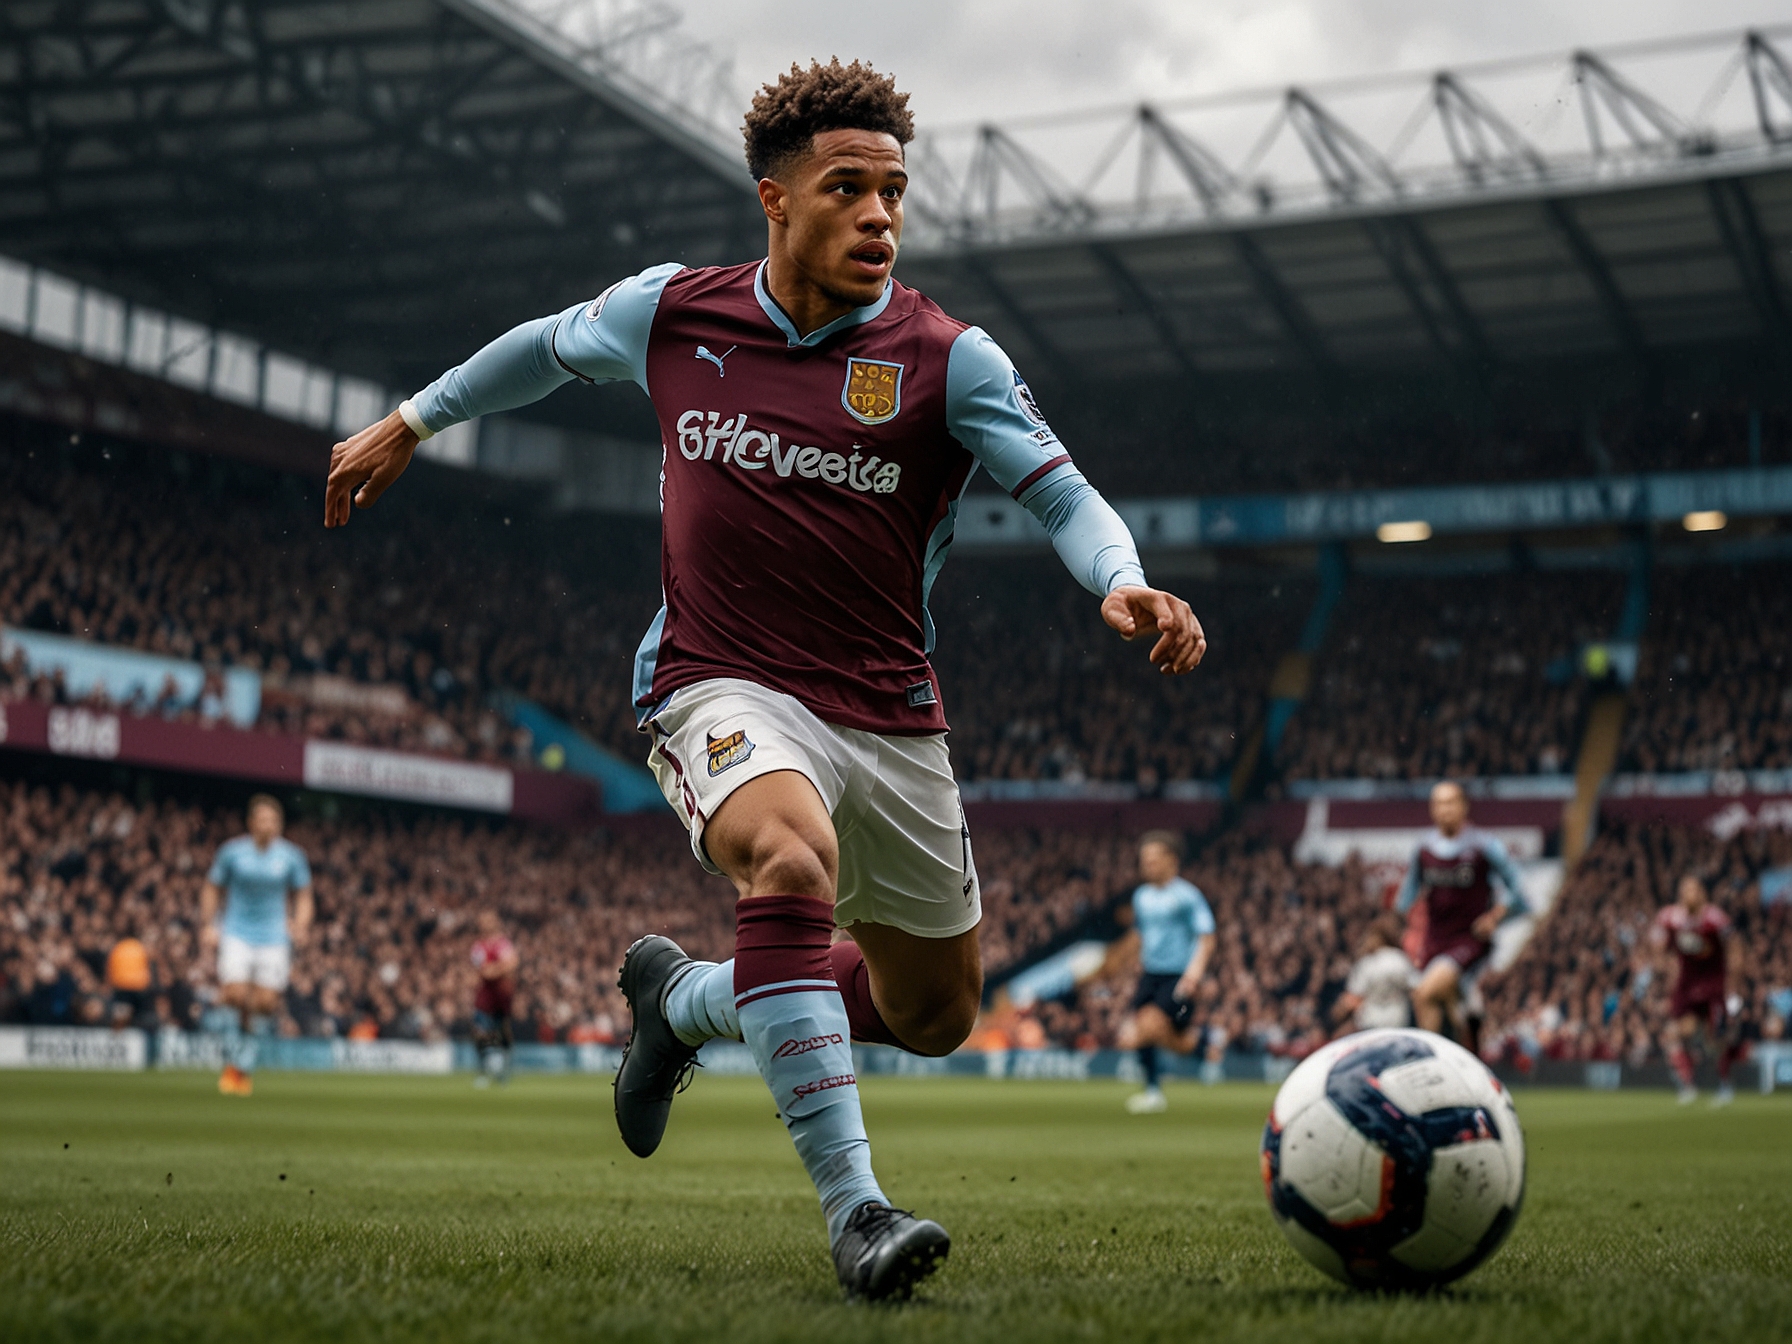 A dynamic image of Aston Villa's Omari Kellyman showcasing his agility and vision on the ball, capturing the excitement and potential impact of his upcoming transfer.